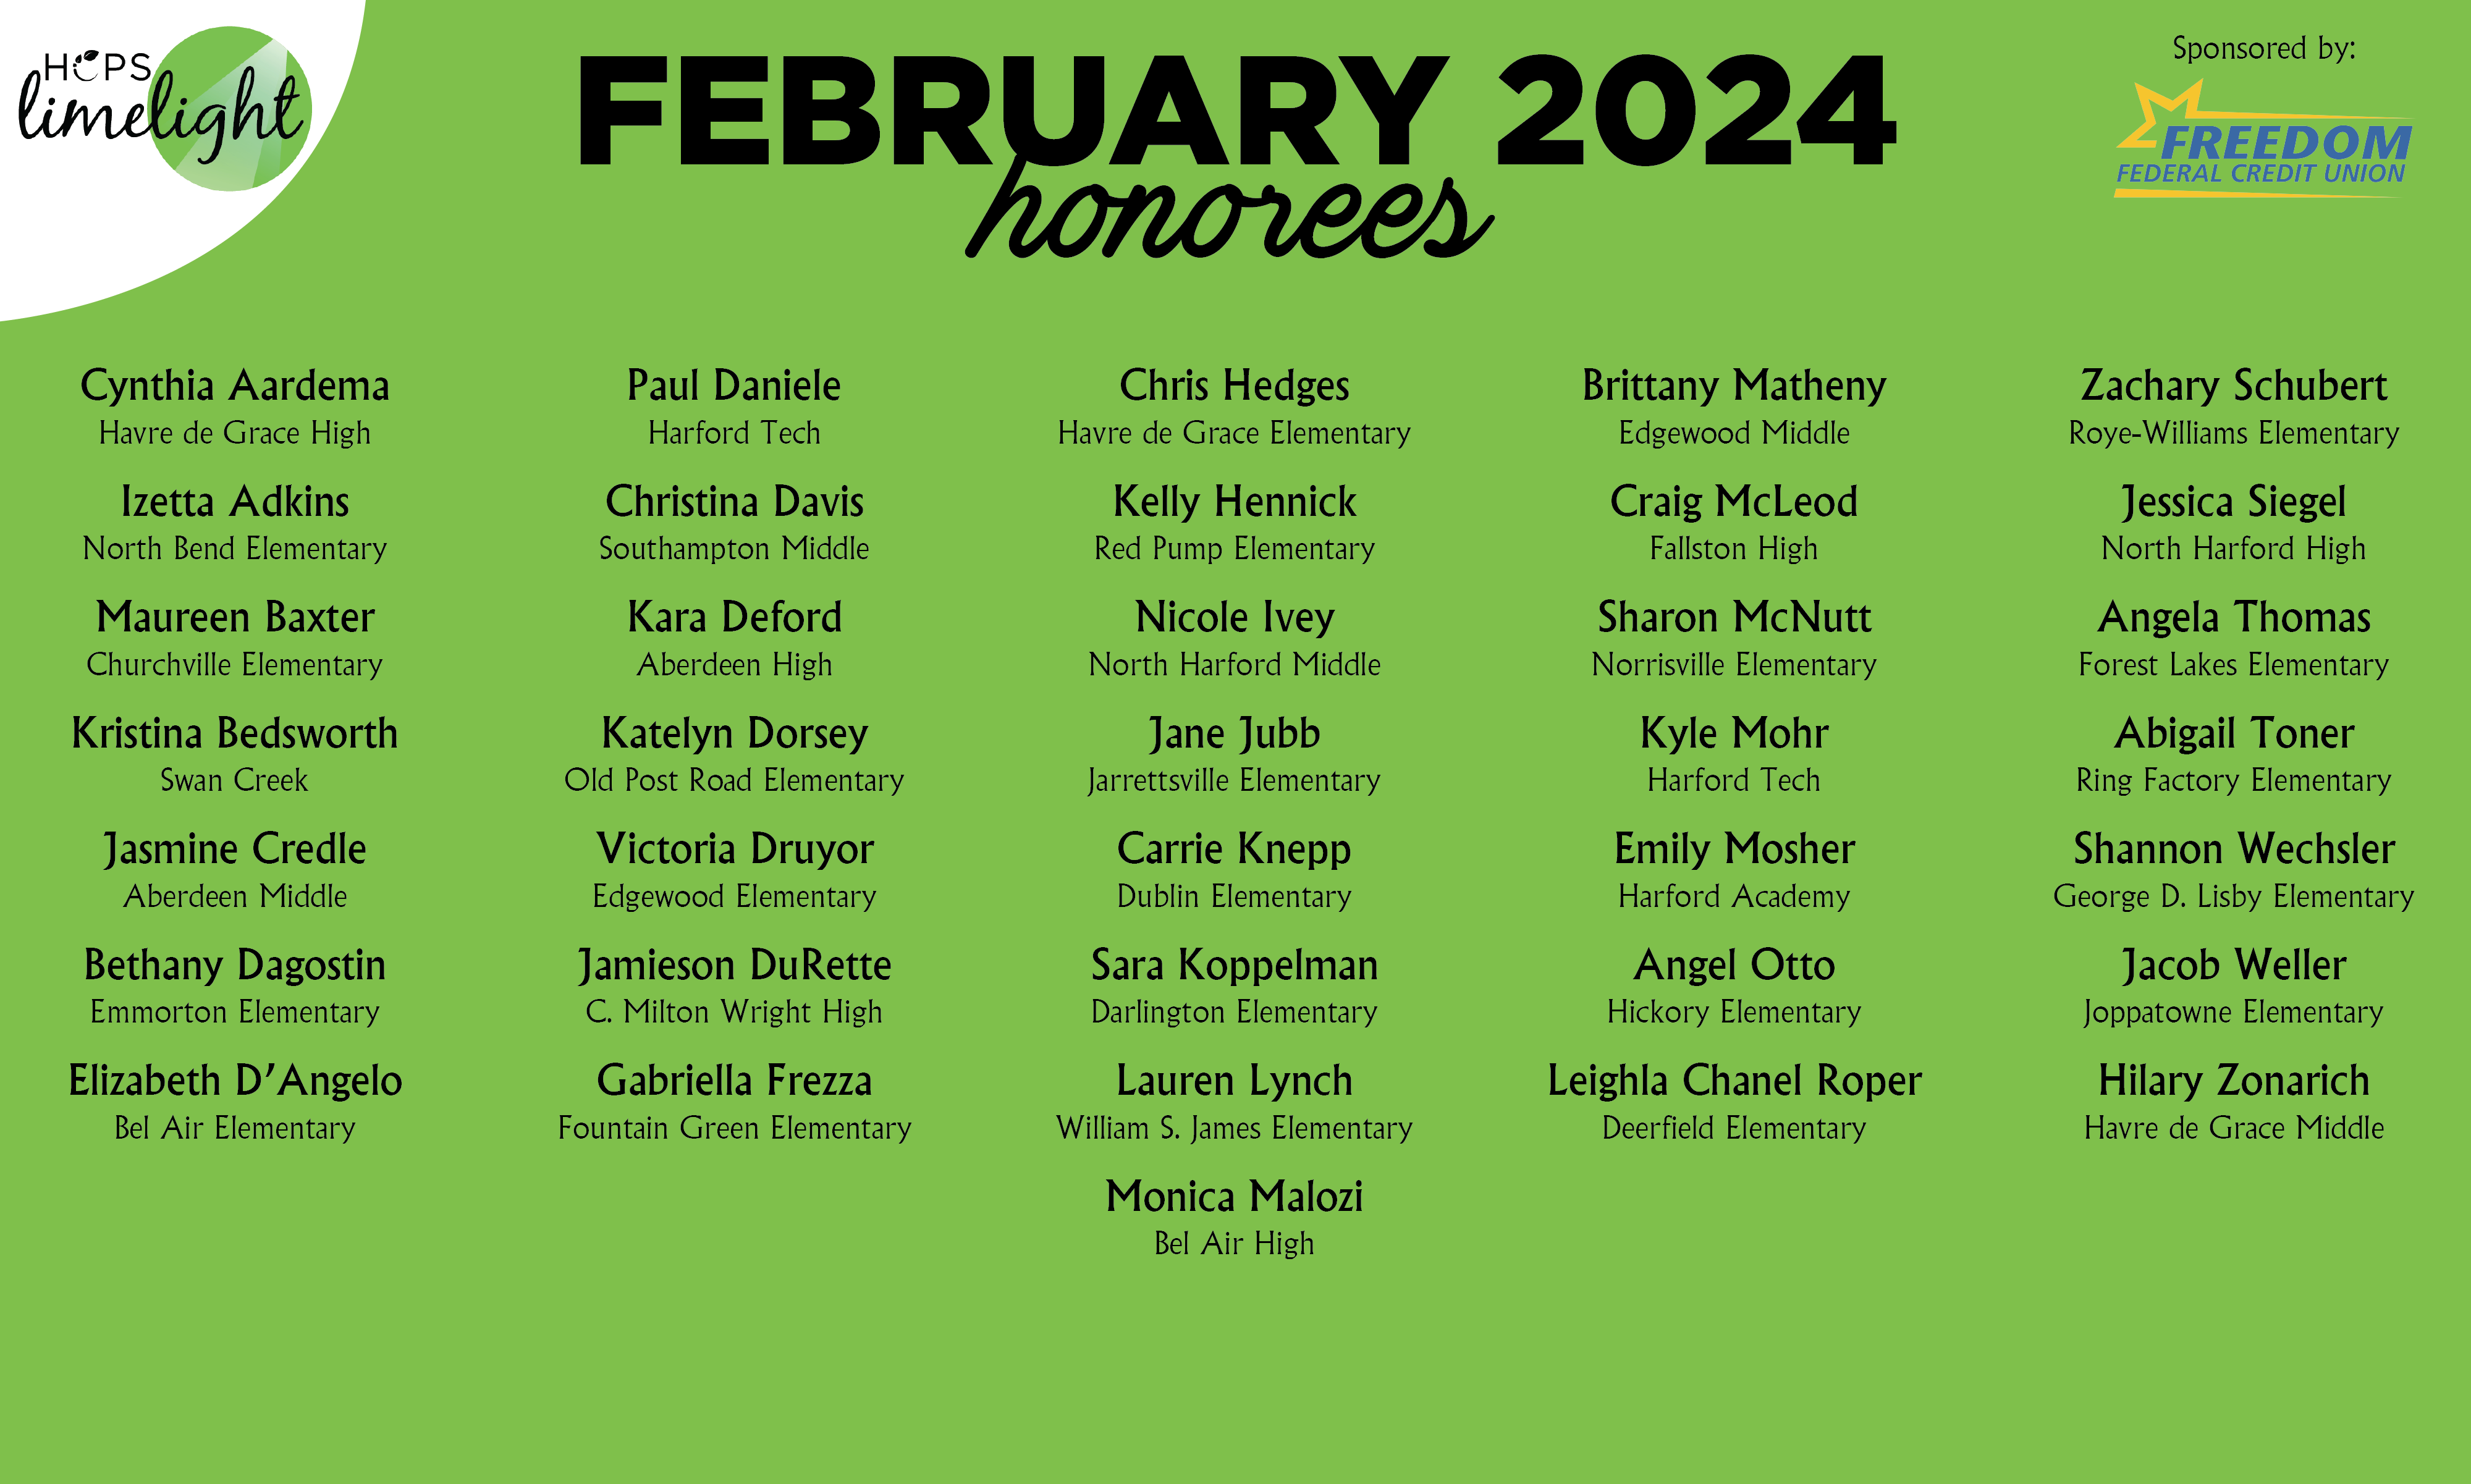 HCPS Limelight Honorees - February 2024